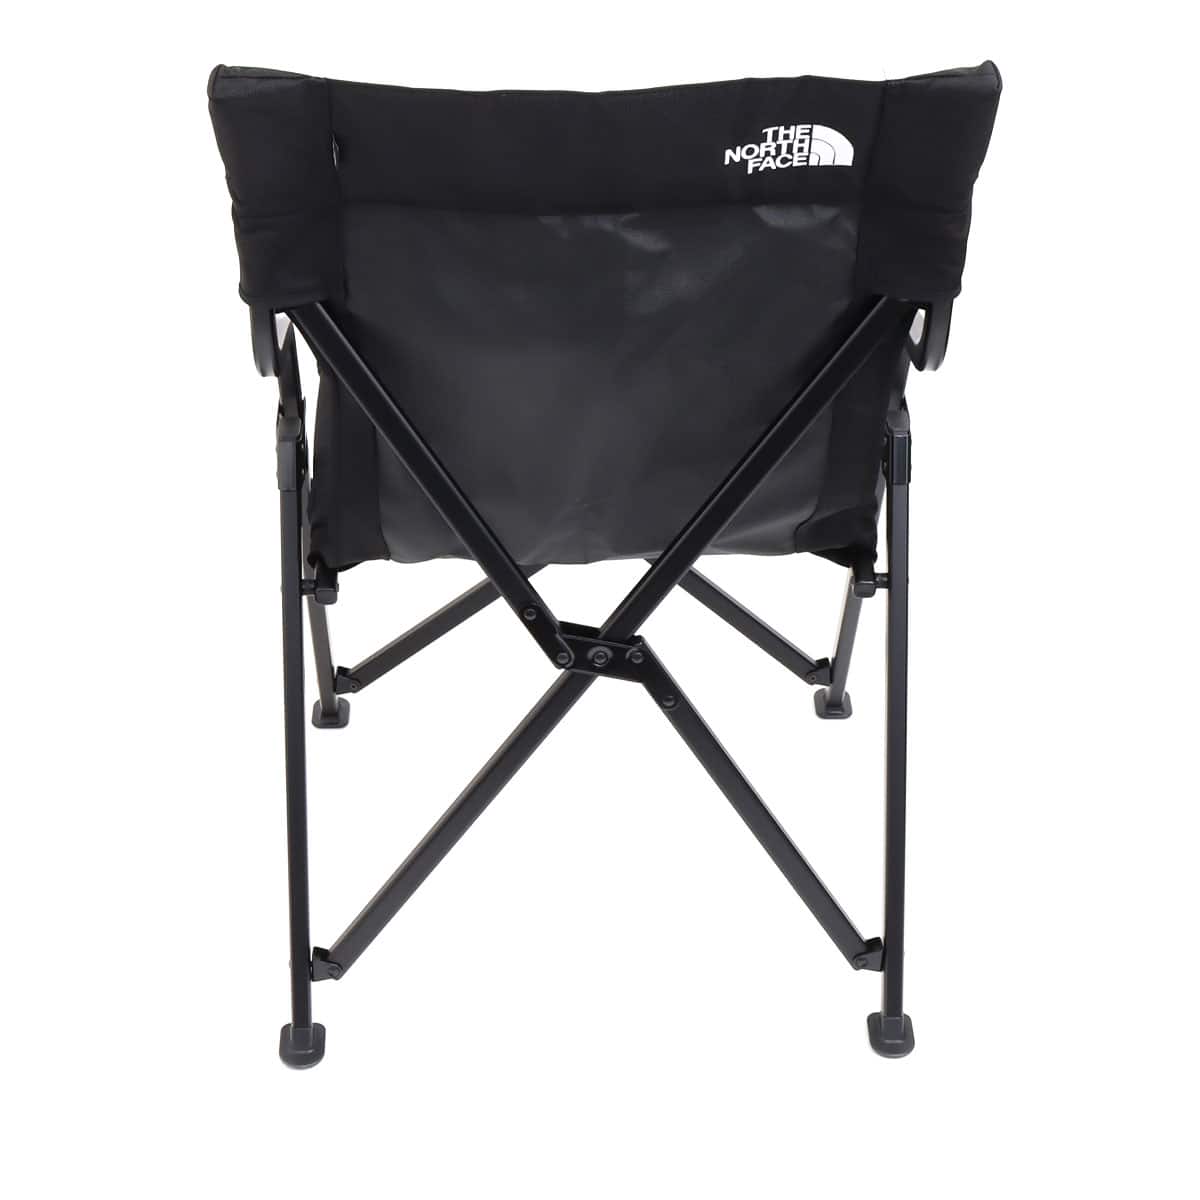 THE NORTH FACE TNF CAMP CHAIR SLM BLACK 22SS-I